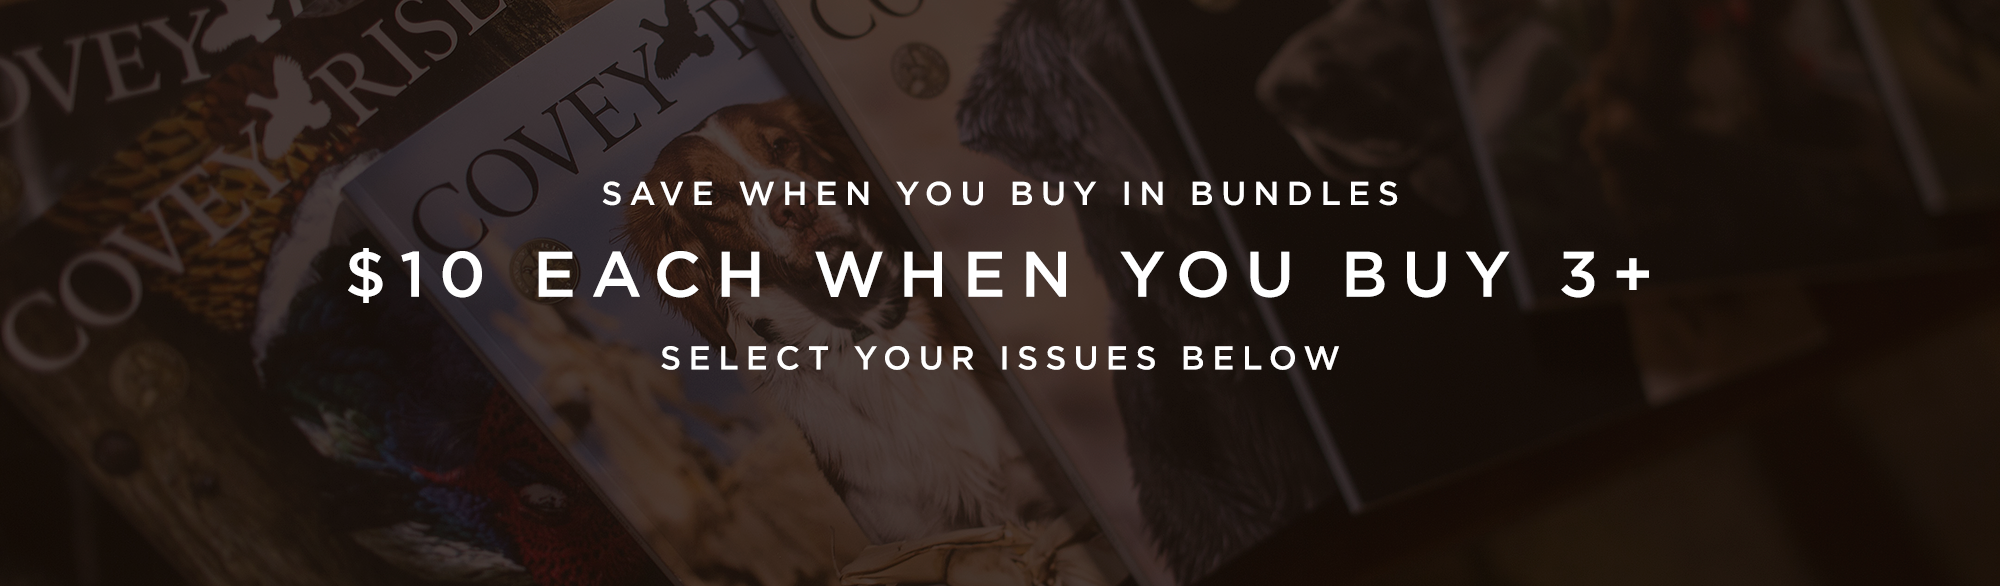 Save When you buy in Bundles